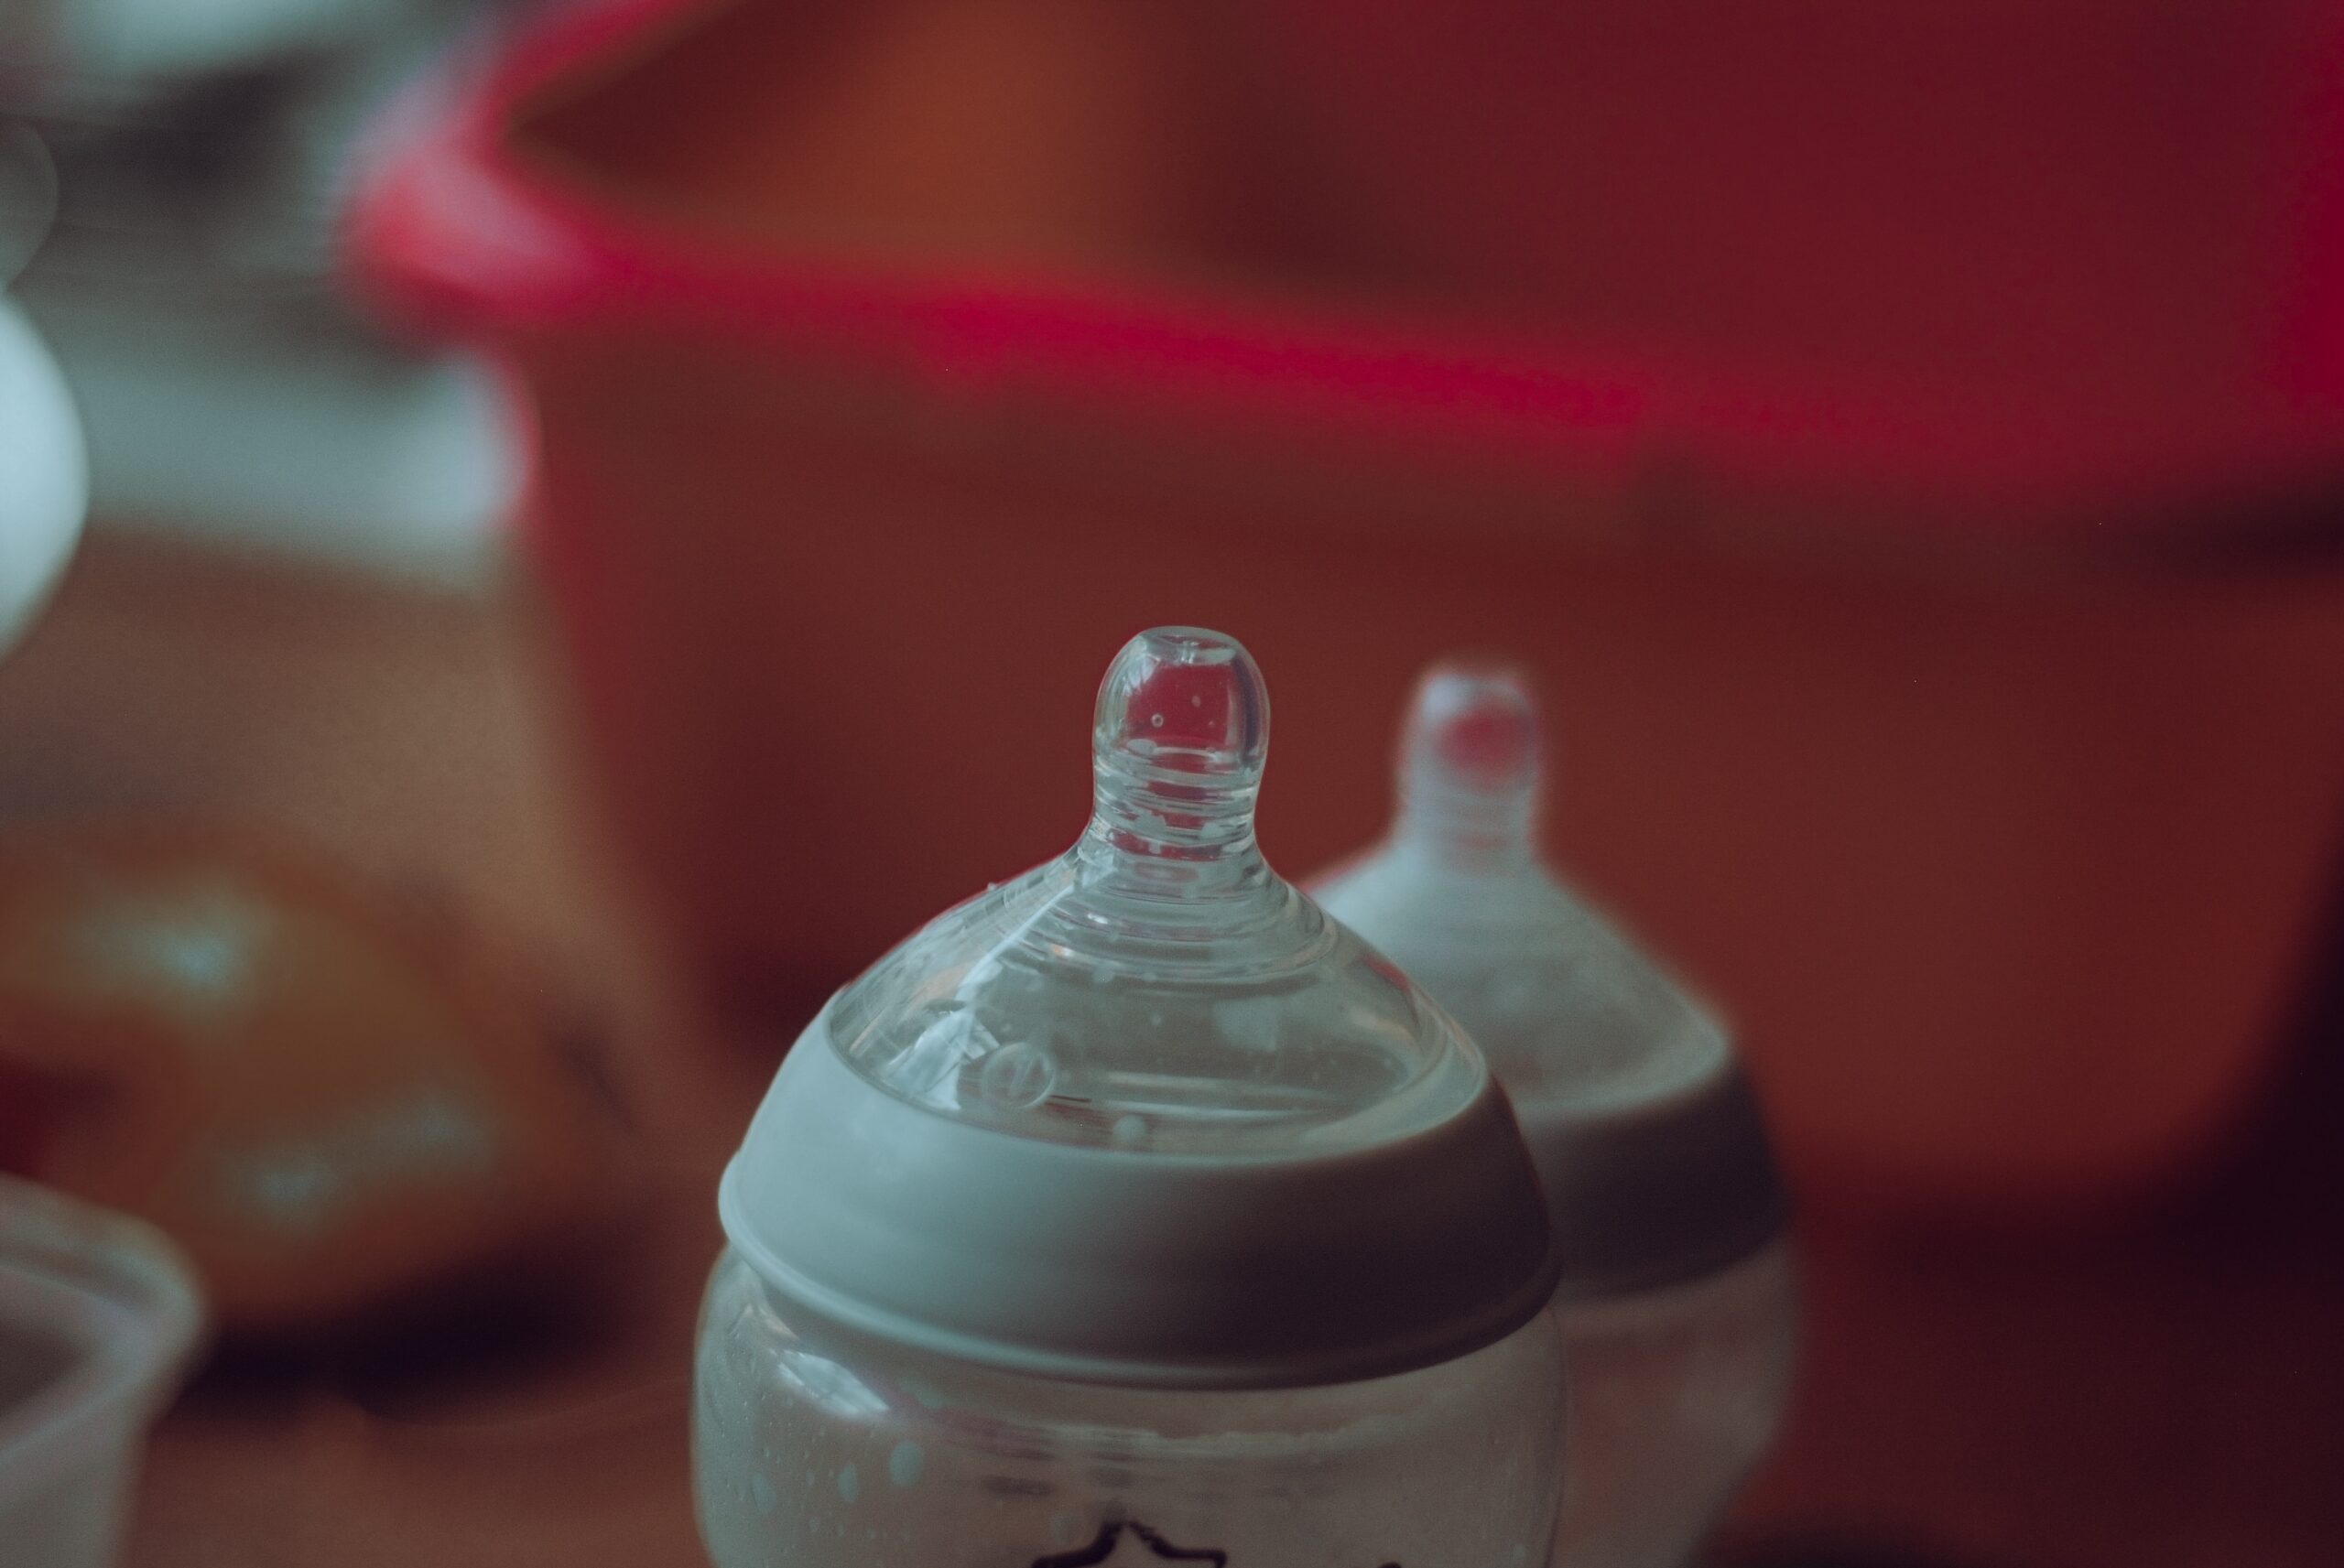 tops of two baby bottles.